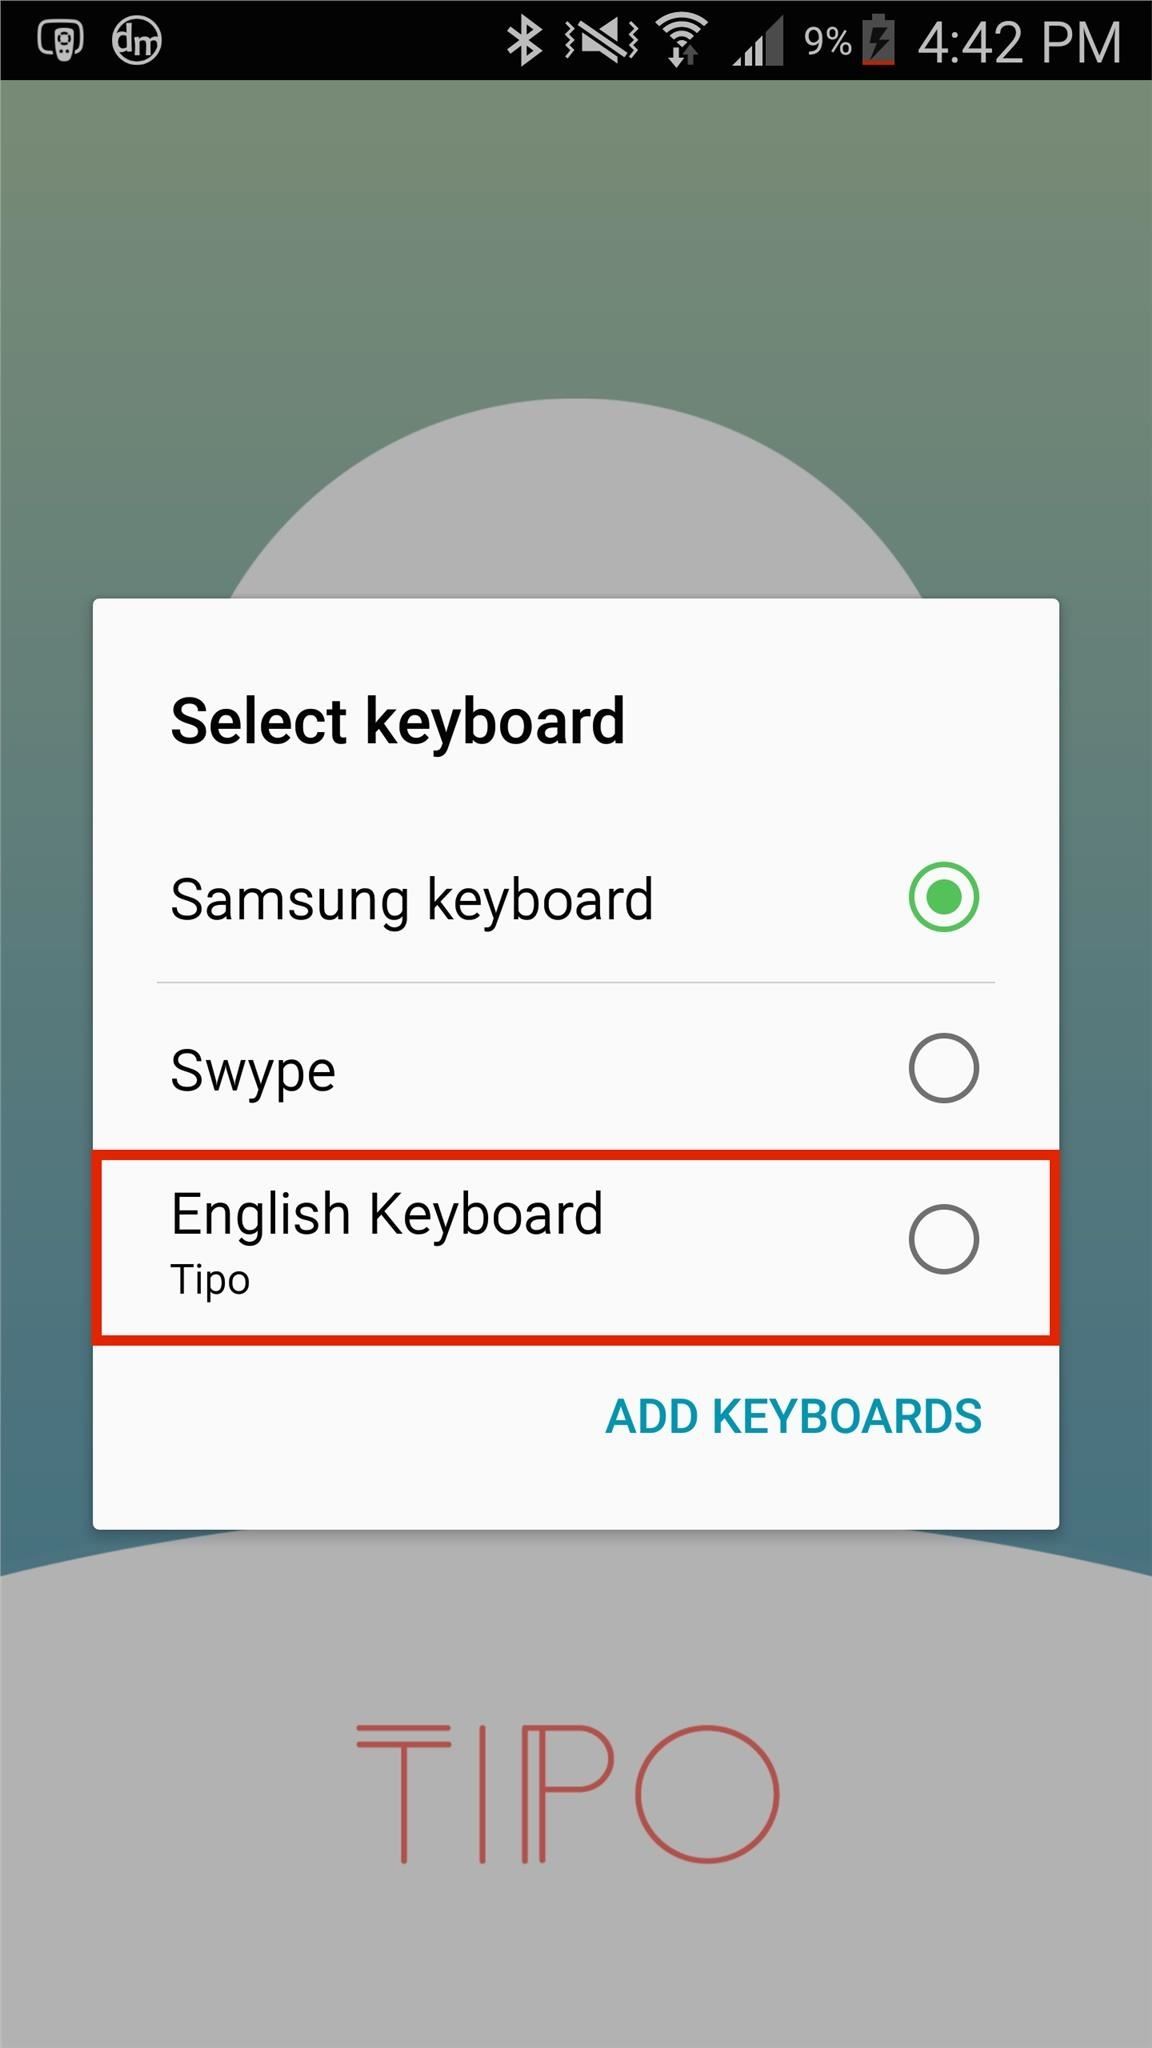 Autocorrect Only Fixes Mistakes, but This Android Keyboard Helps Prevent Them